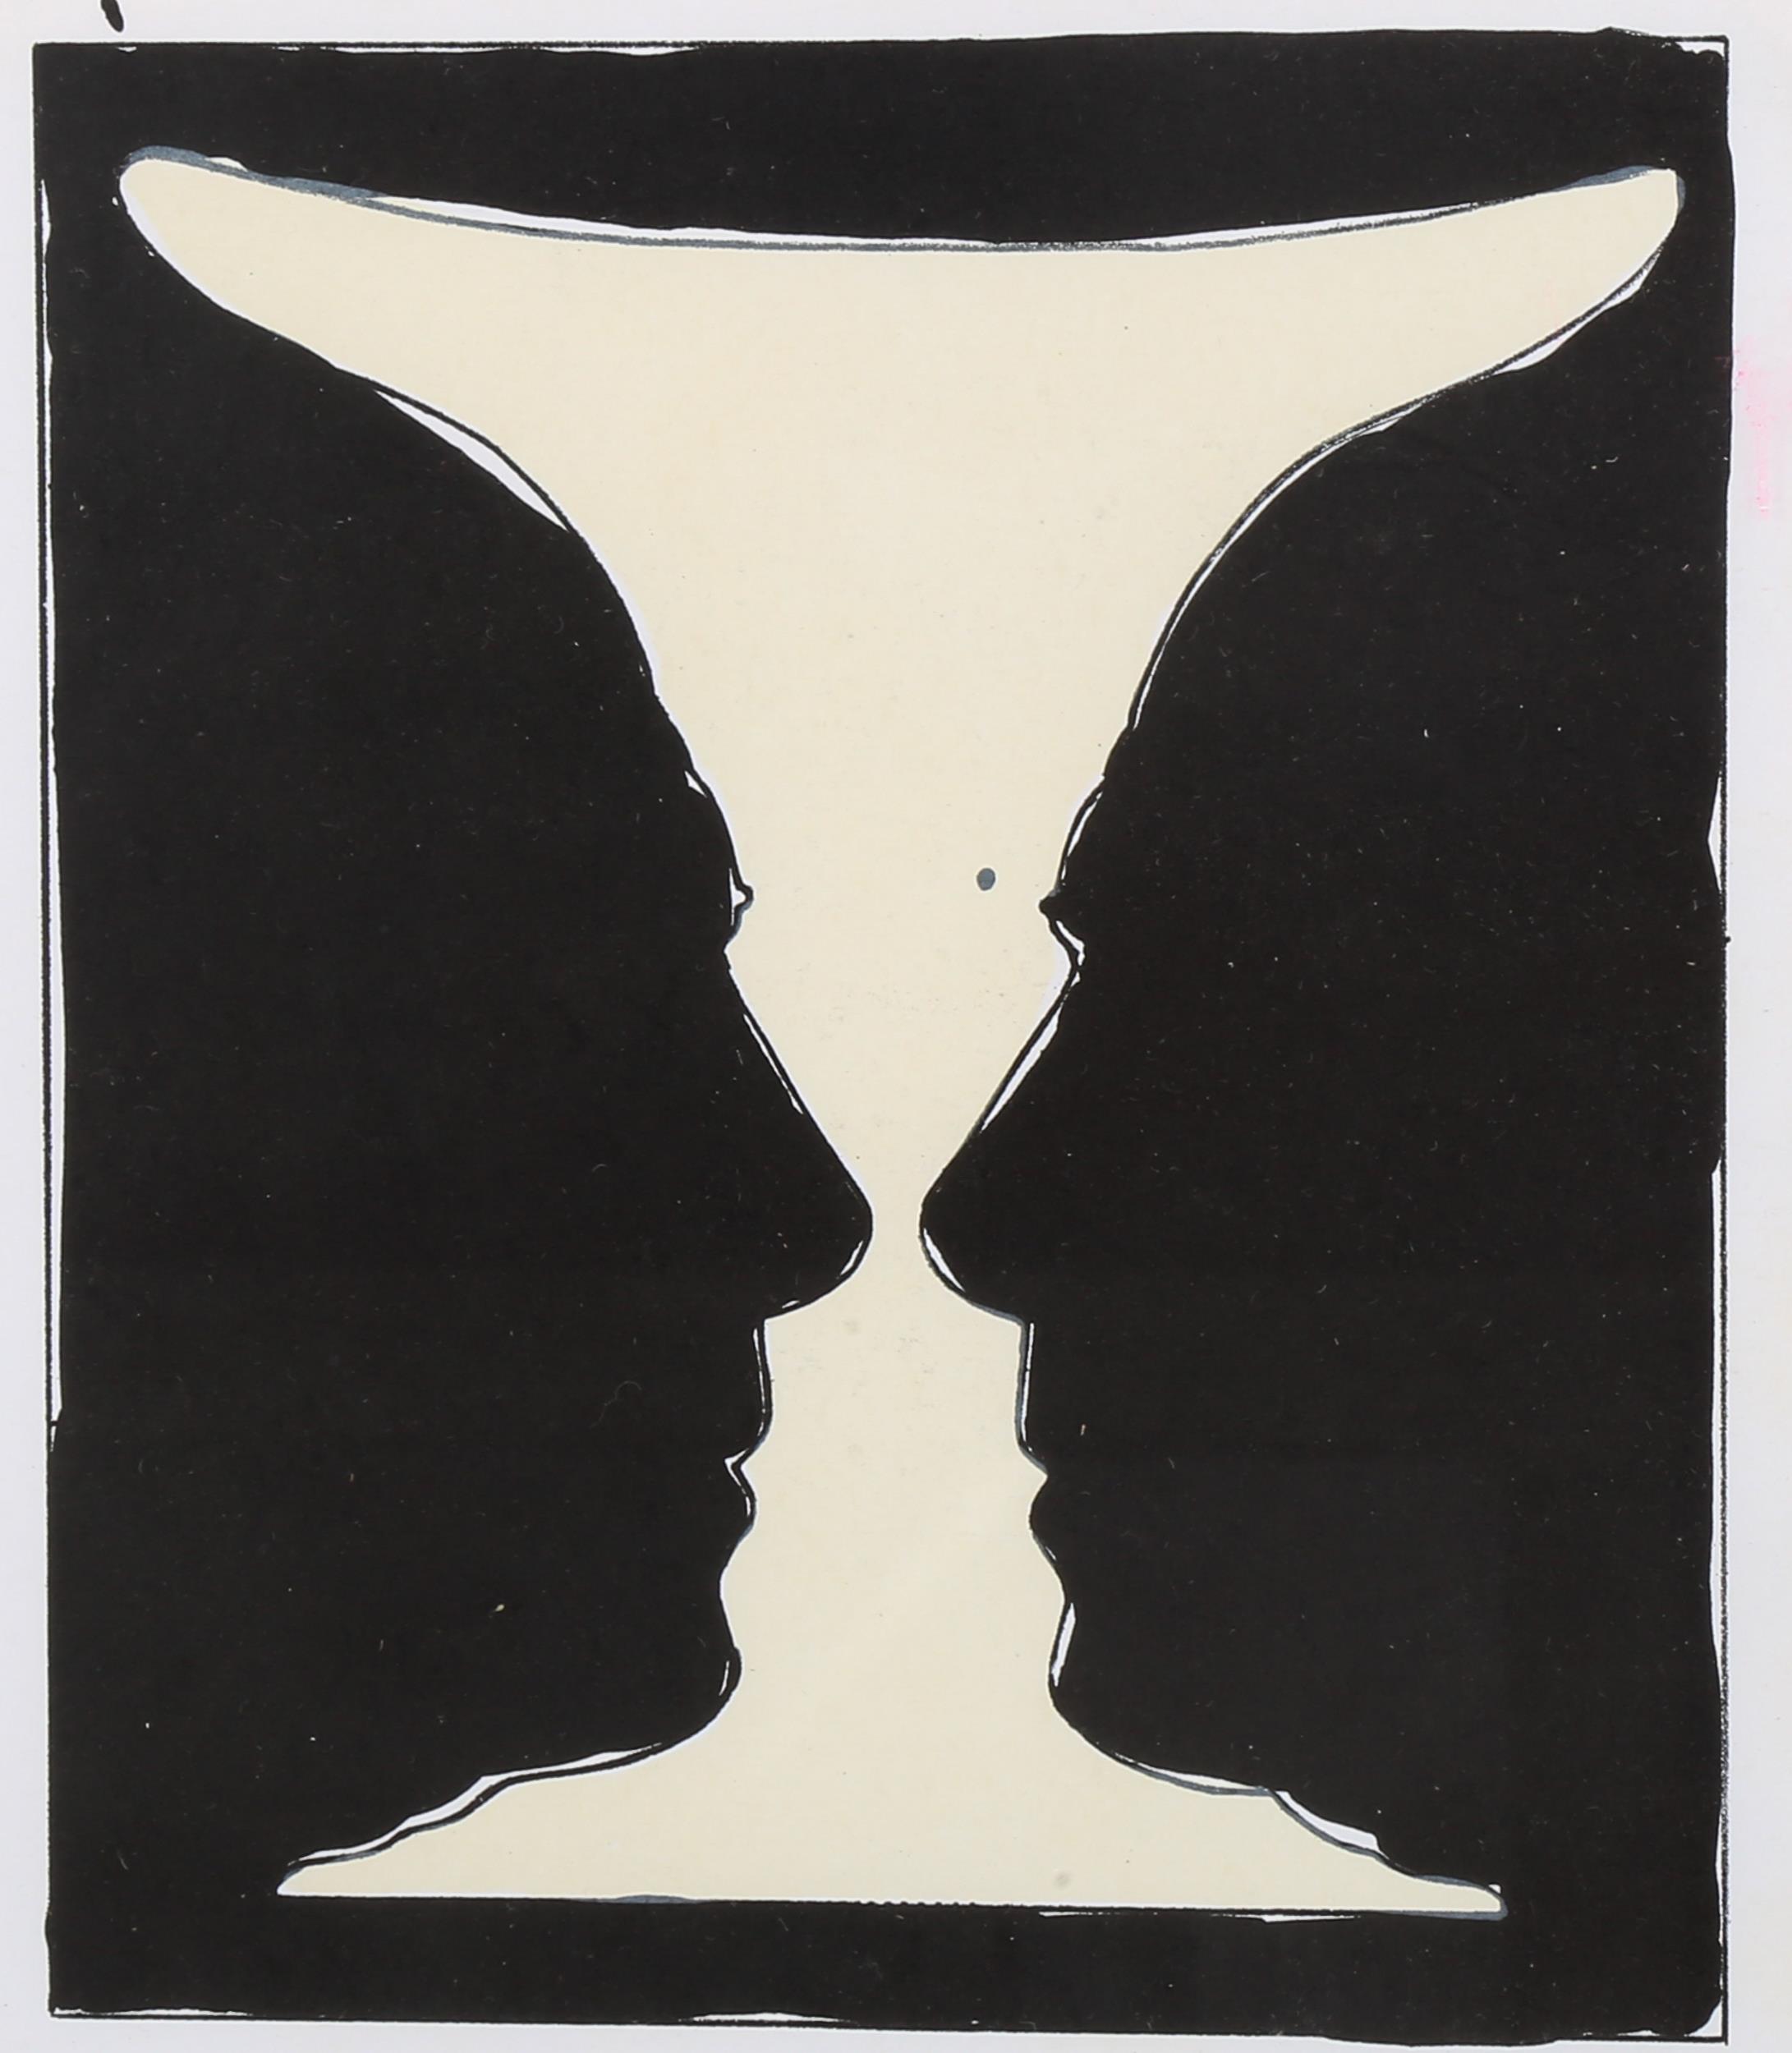 Jasper Johns, original lithograph, Cup To Face, XXE Siecle issue 1973, image 25cm x 20cm, framed